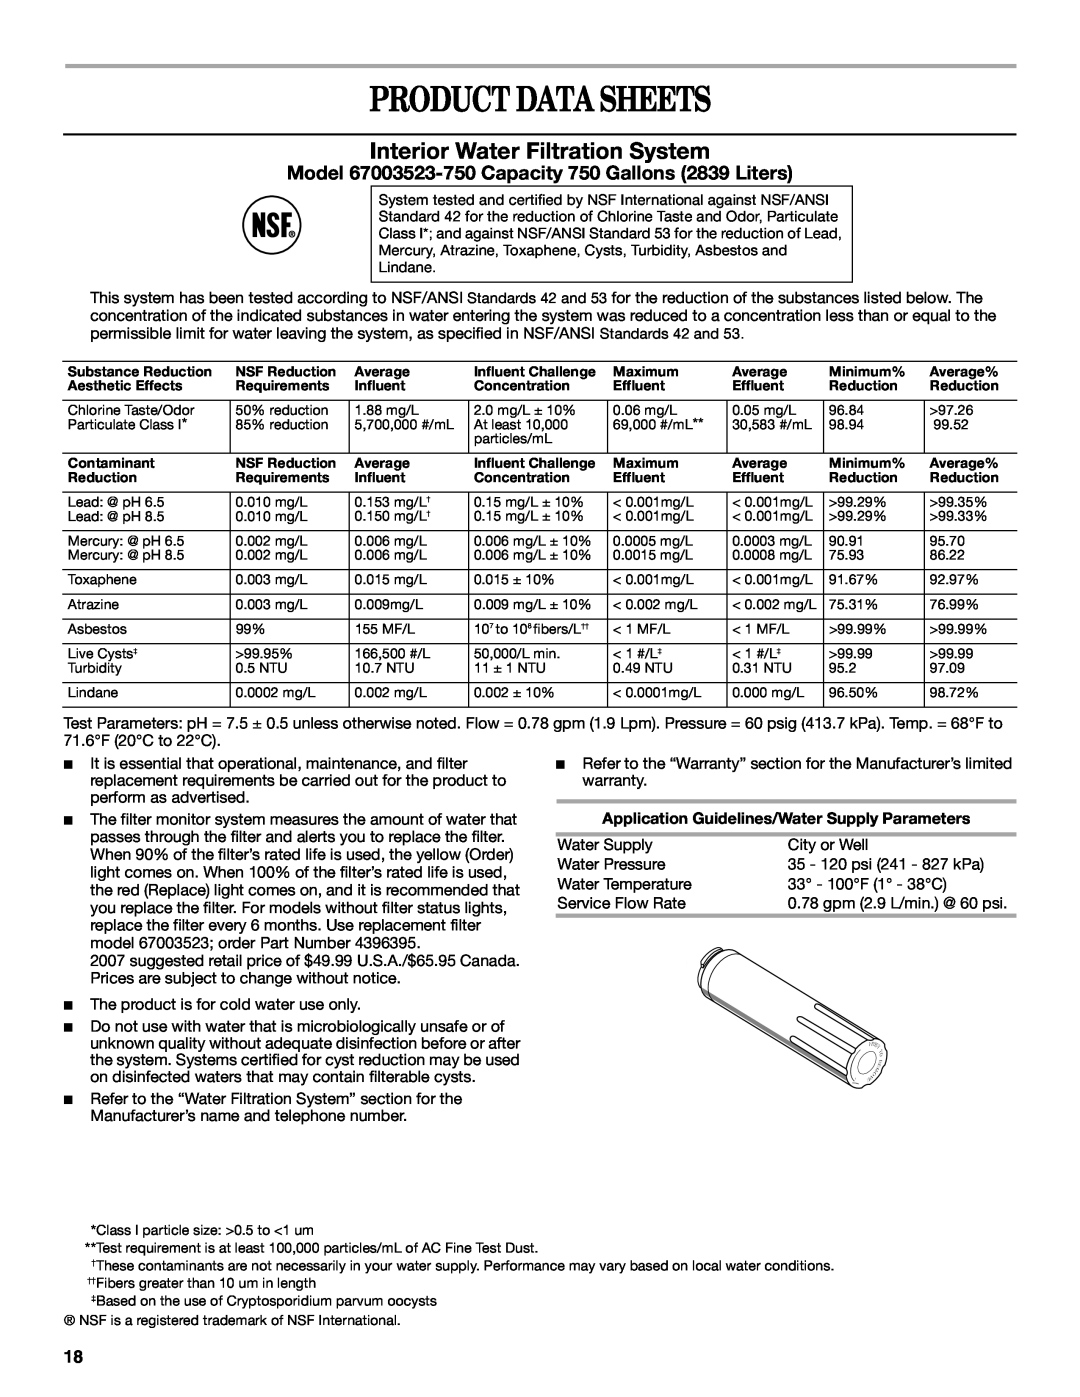 Whirlpool W10175448A Product Data Sheets, Interior Water Filtration System, Application Guidelines/Water Supply Parameters 